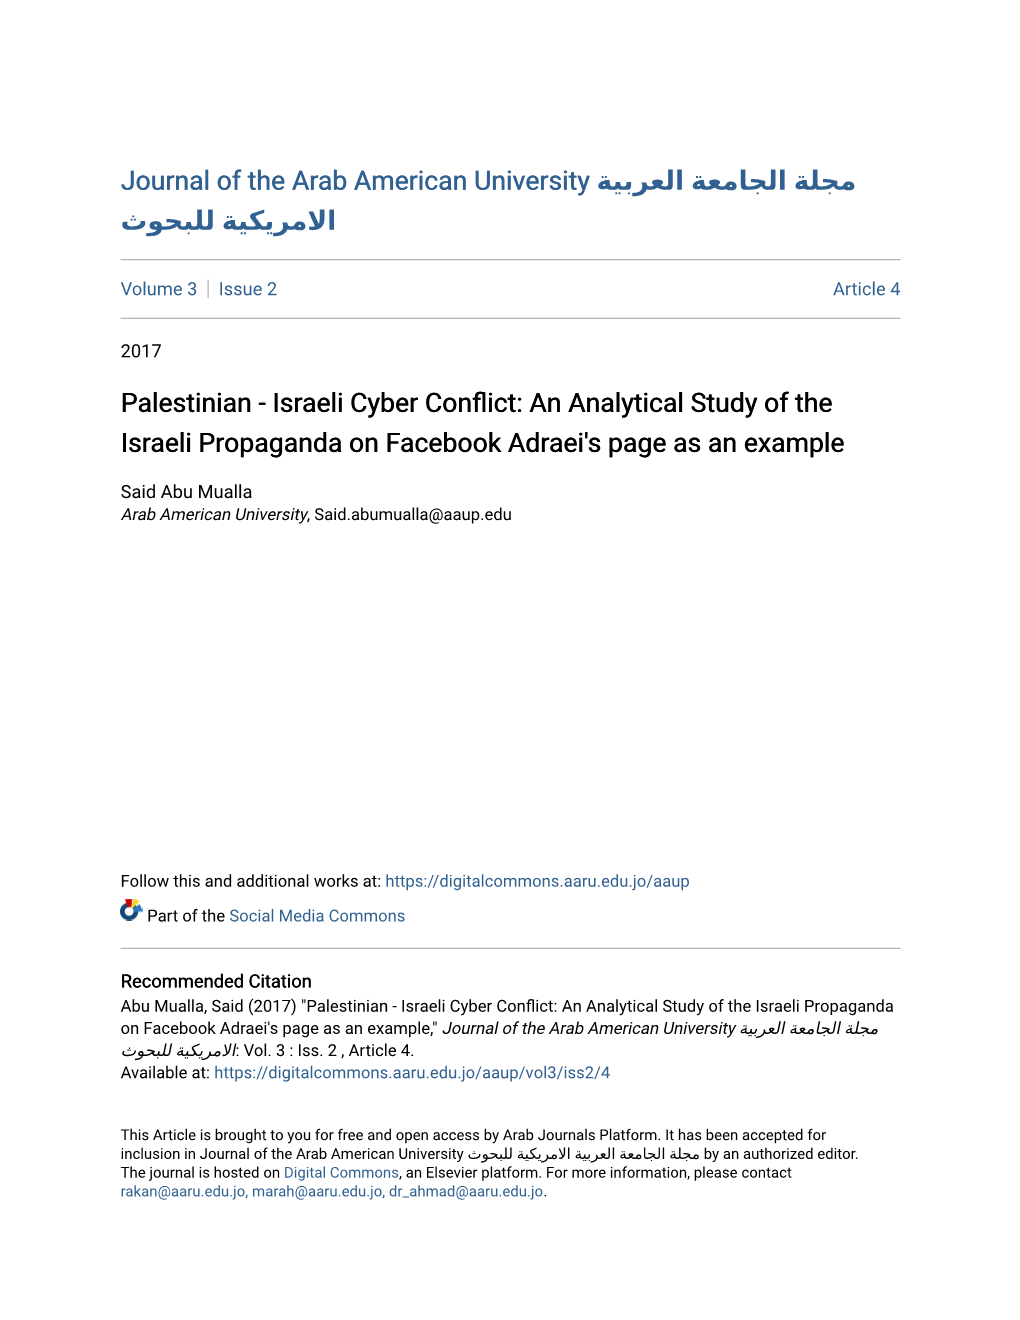 Palestinian - Israeli Cyber Conflict: an Analytical Study of the Israeli Propaganda on Facebook Adraei's Page As an Example